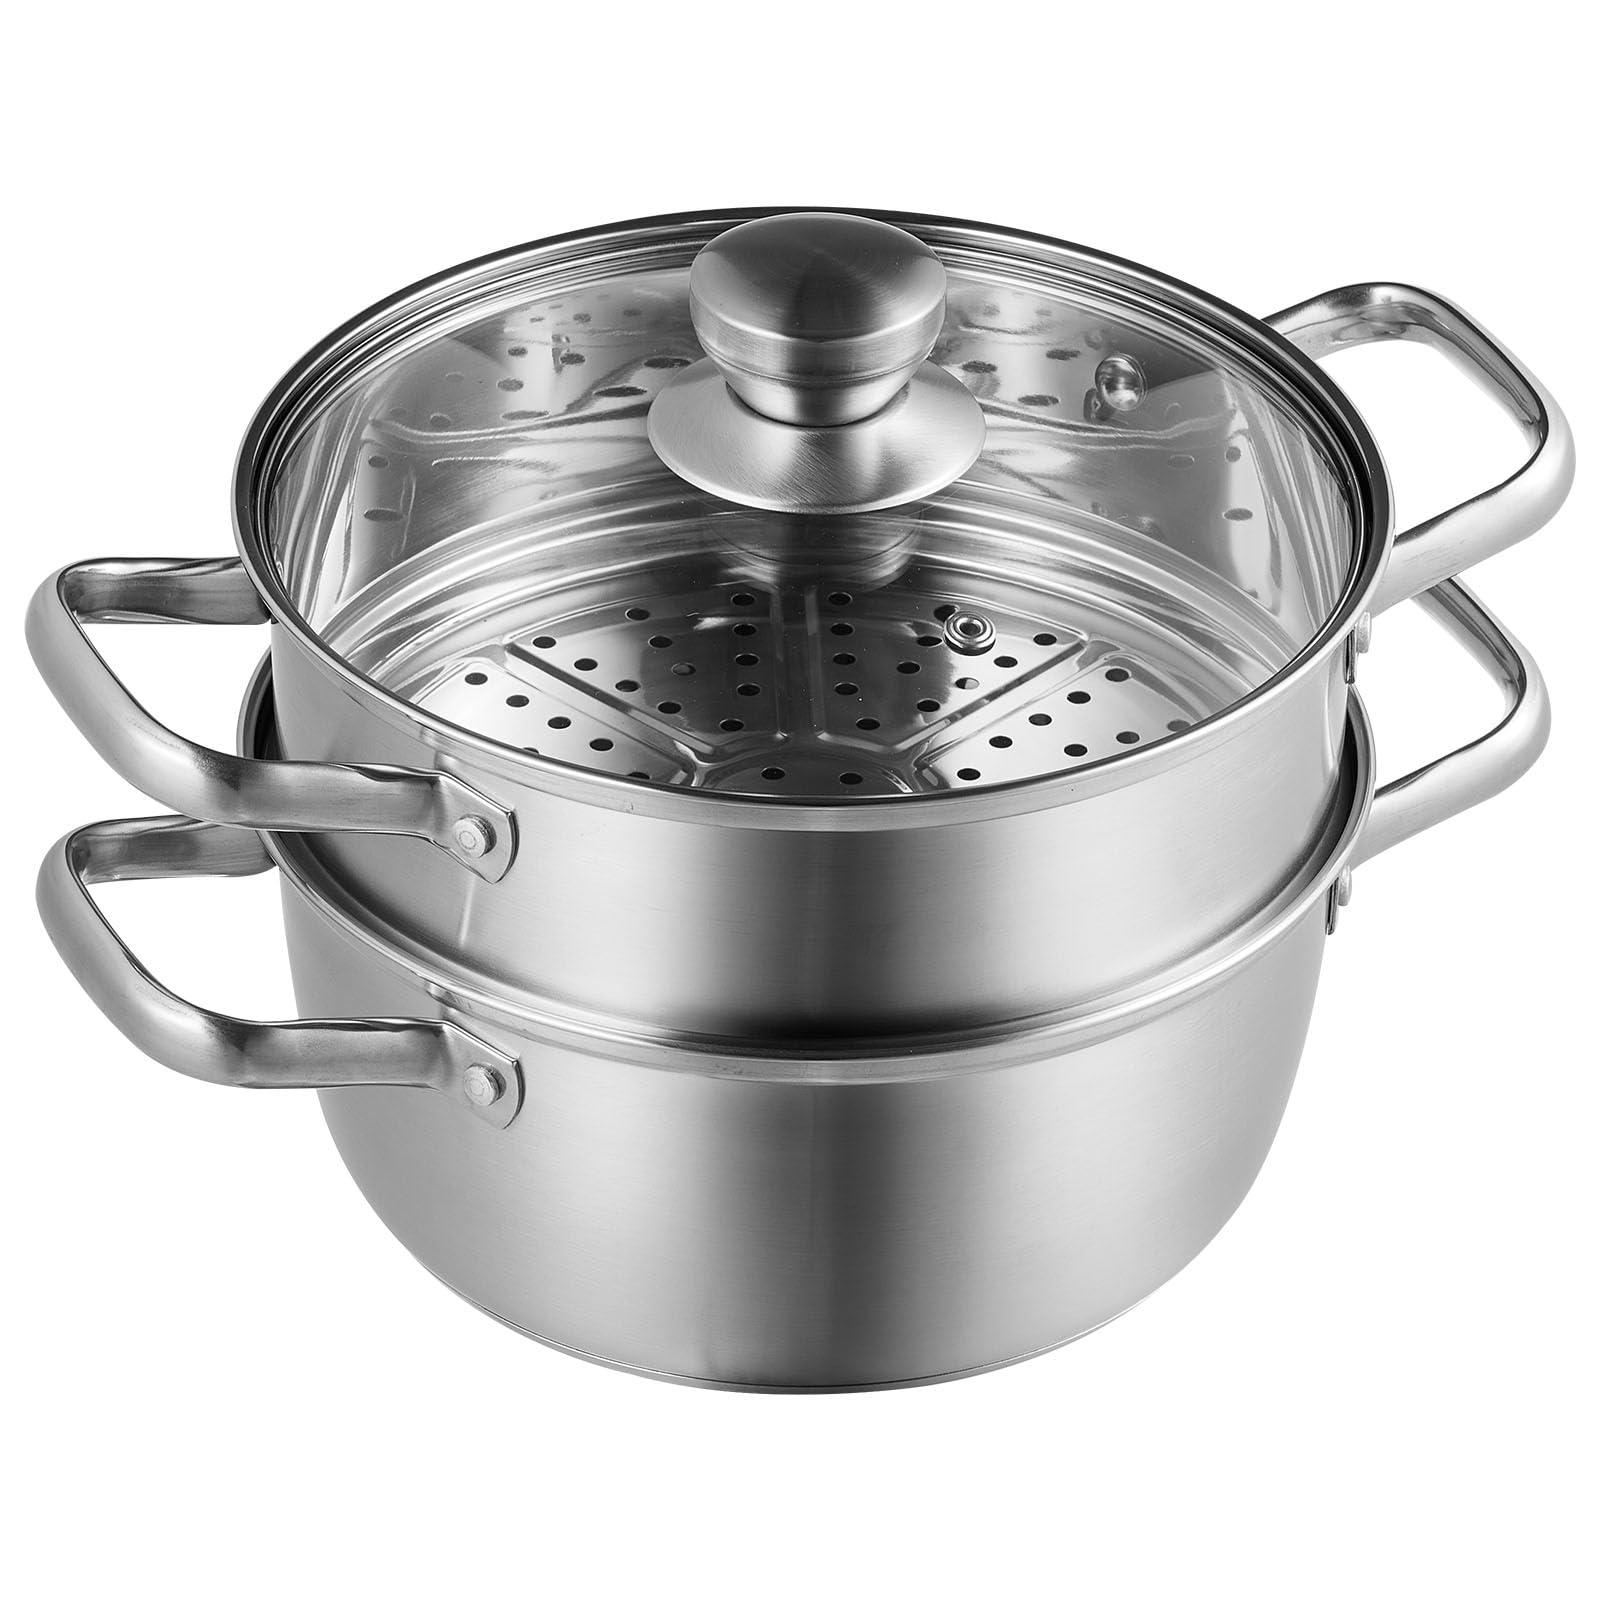 vevor steamer pot, 9.5in/24cm steamer pot for cooking with 5qt stock pot and vegetable steamer, food-grade 304 stainless stee